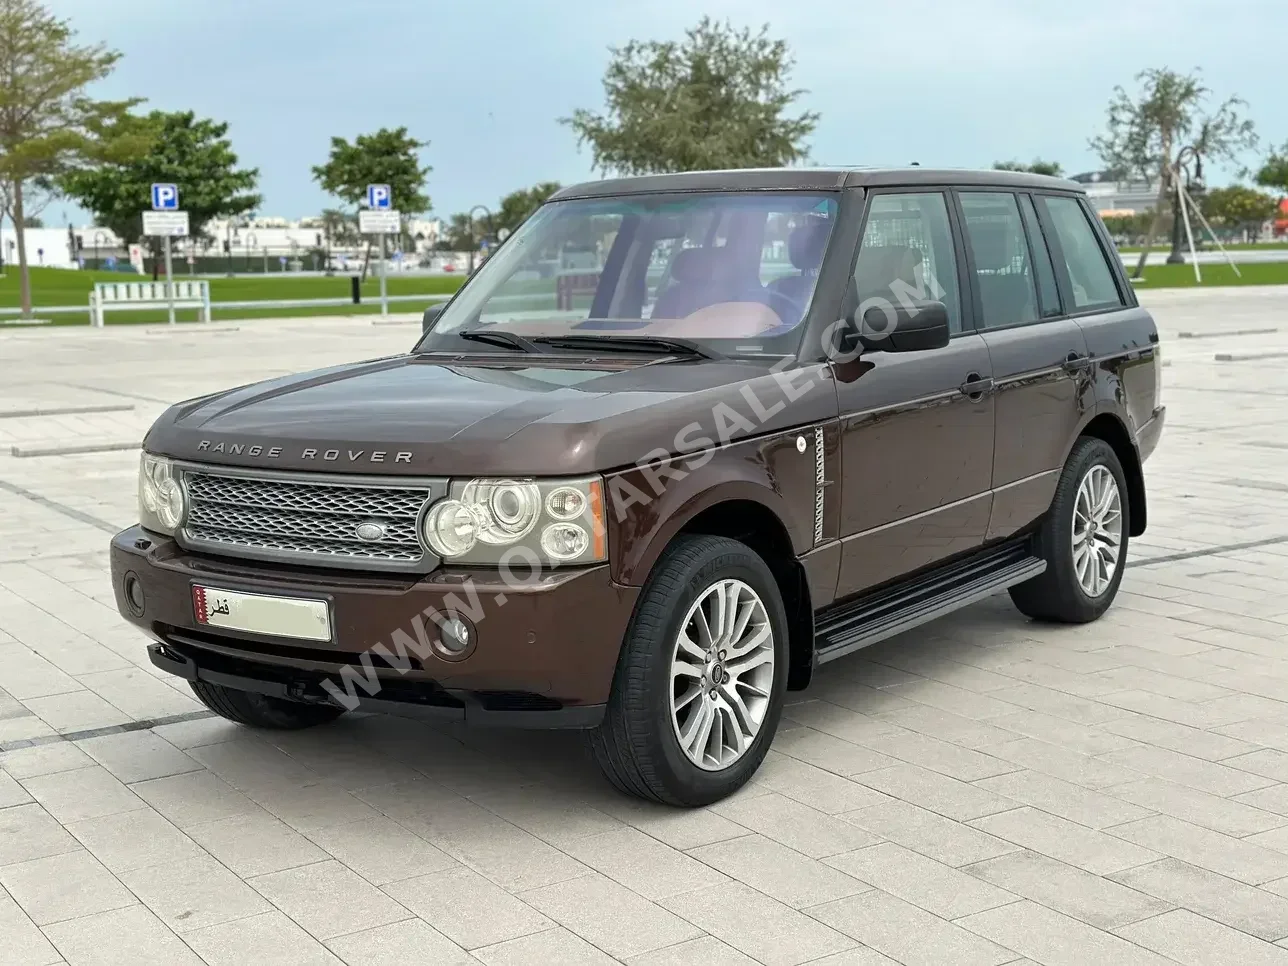 Land Rover  Range Rover  Vogue  2006  Automatic  125,000 Km  8 Cylinder  Four Wheel Drive (4WD)  SUV  Brown